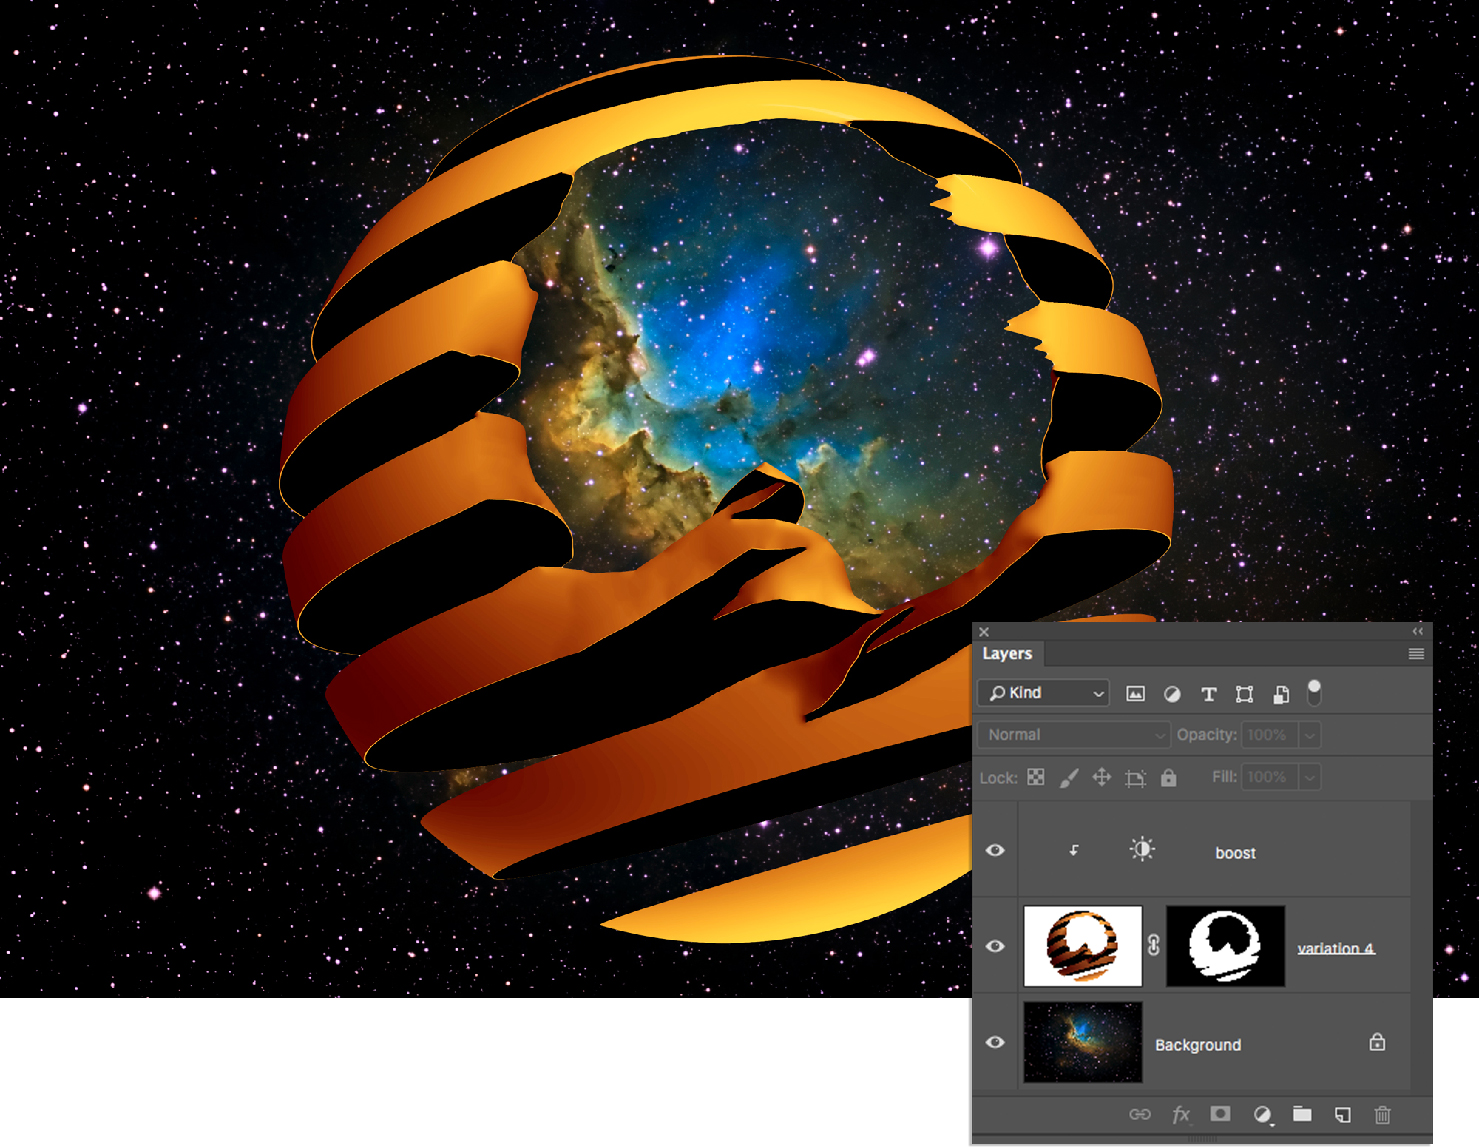 Applying the mask opens a whole to a new galaxy in Photoshop